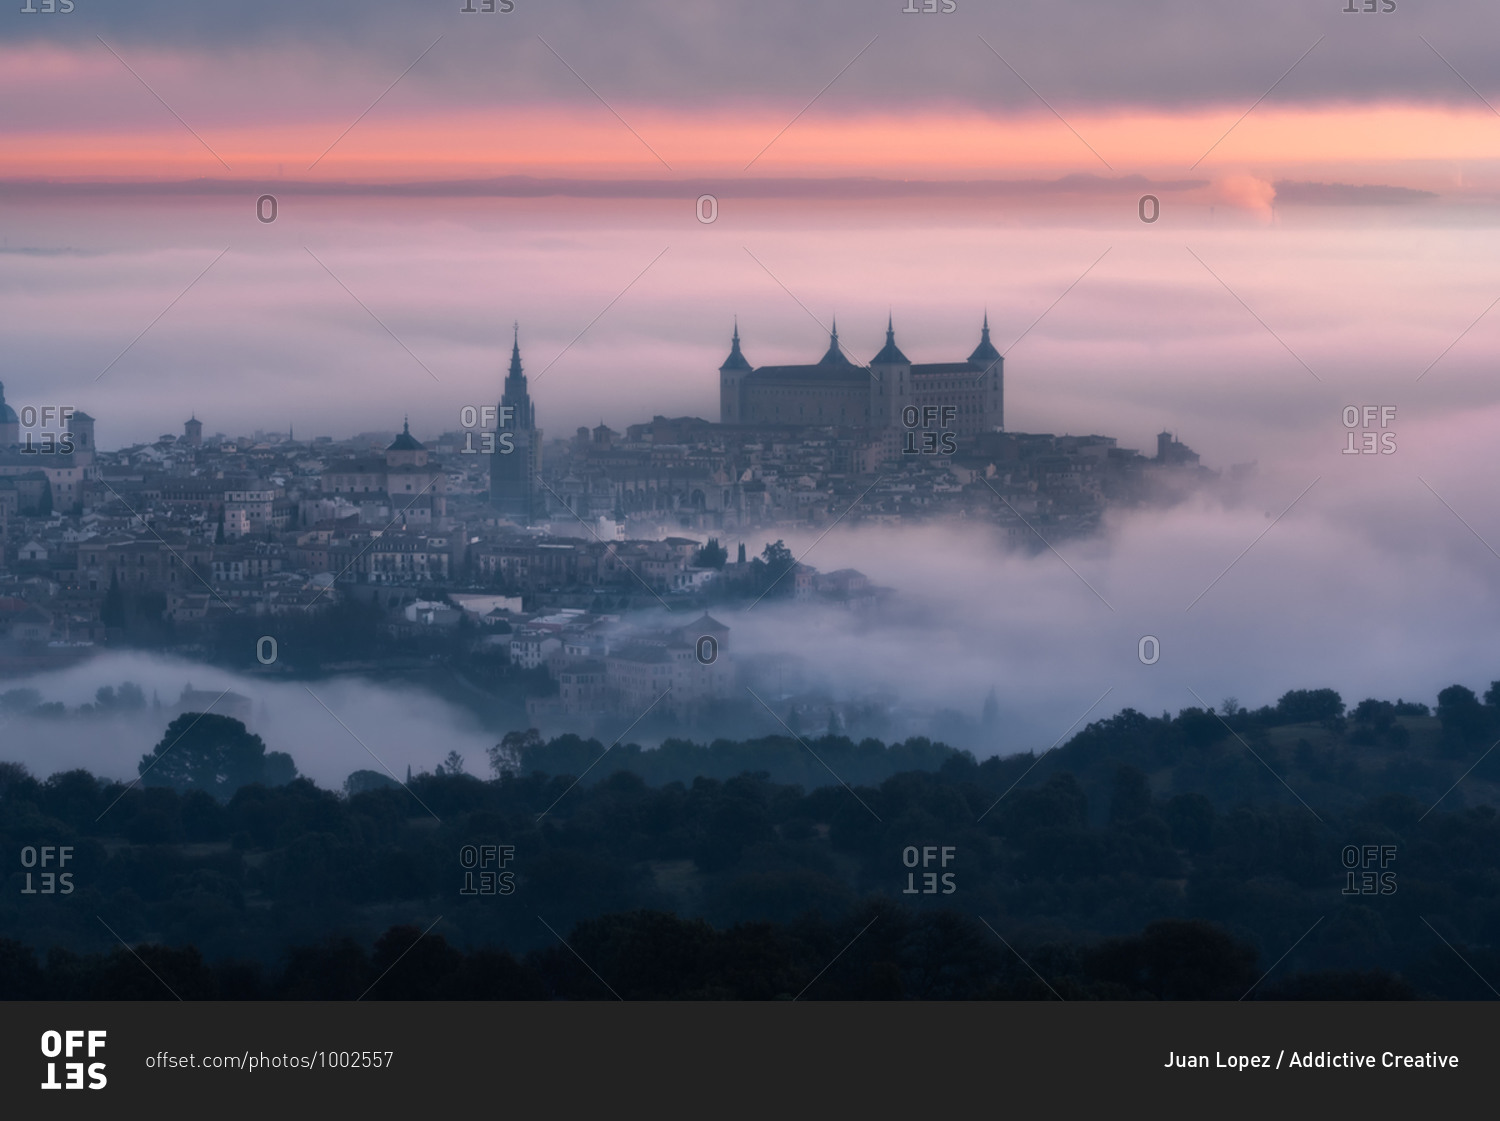 From above wonderful landscape of medieval castle built over city in misty colorful sunrise